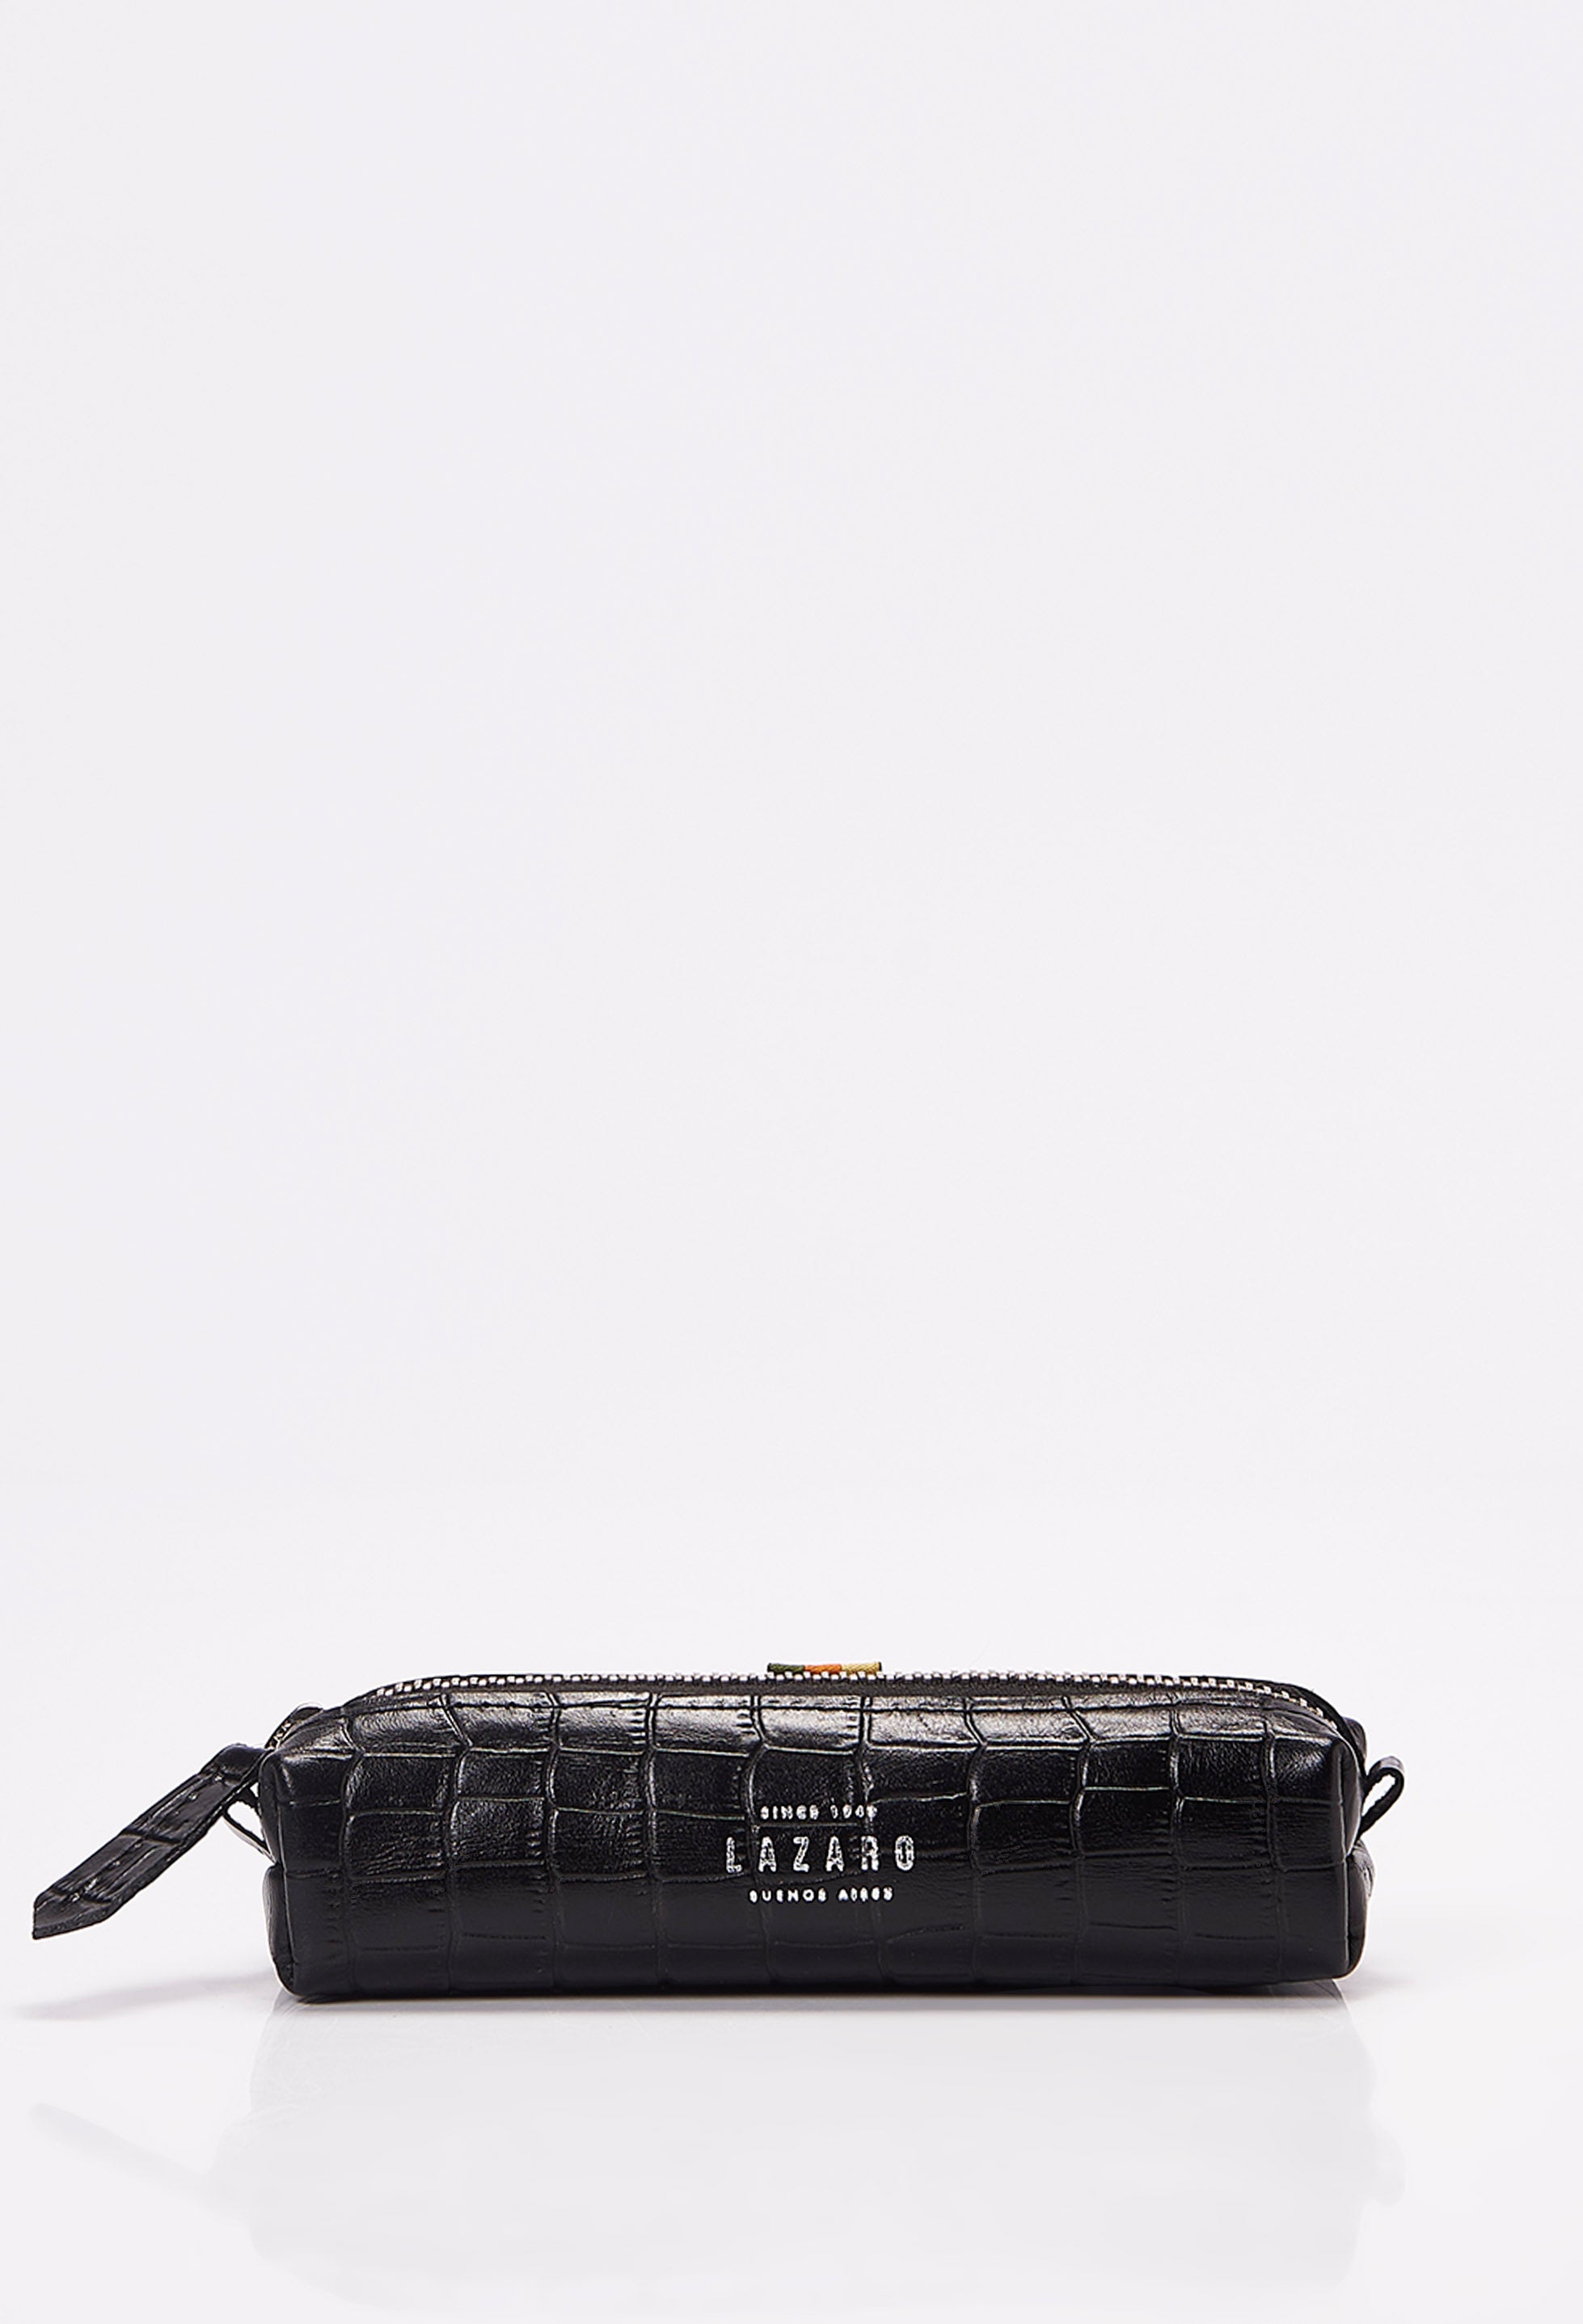 Front of a Black Croco Leather Pencil Case with Lazaro embossed logo.